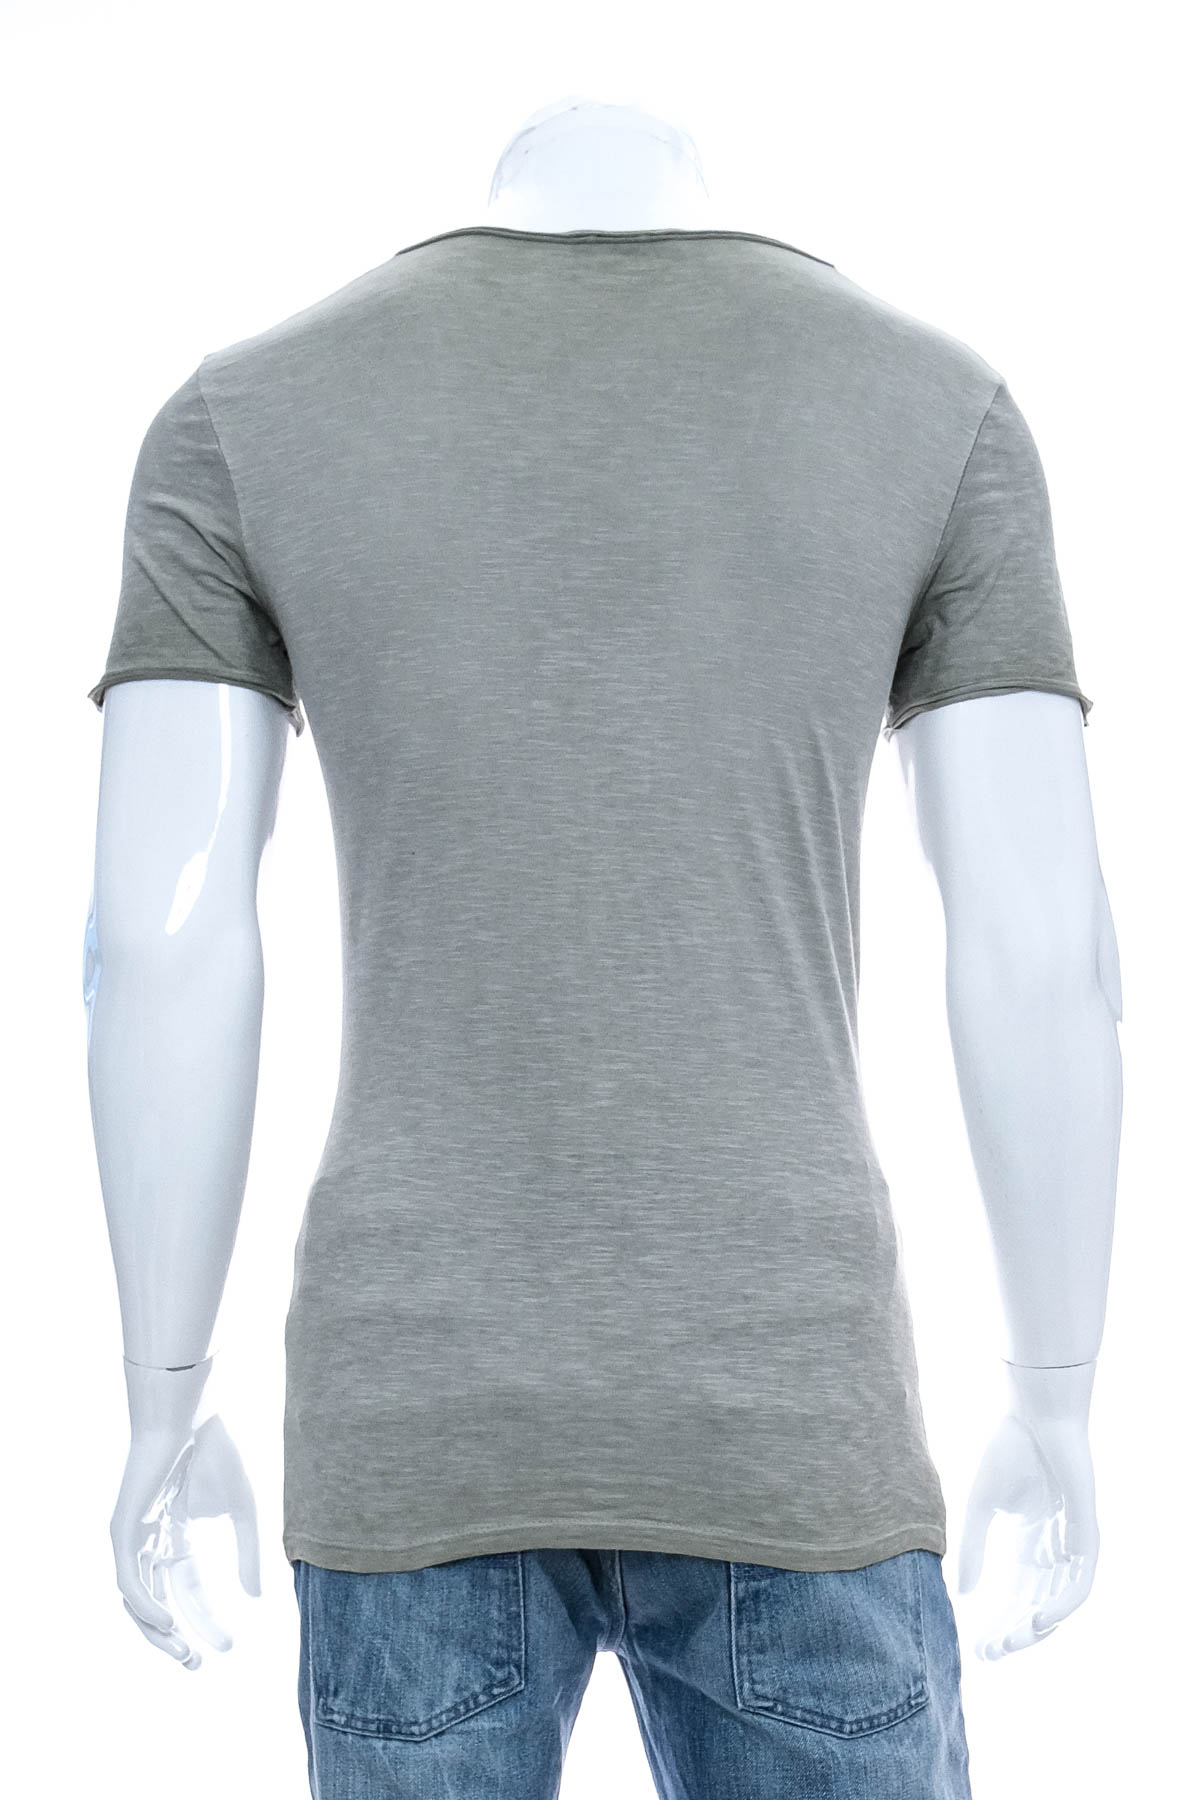 Men's T-shirt - Made in Italy - 1